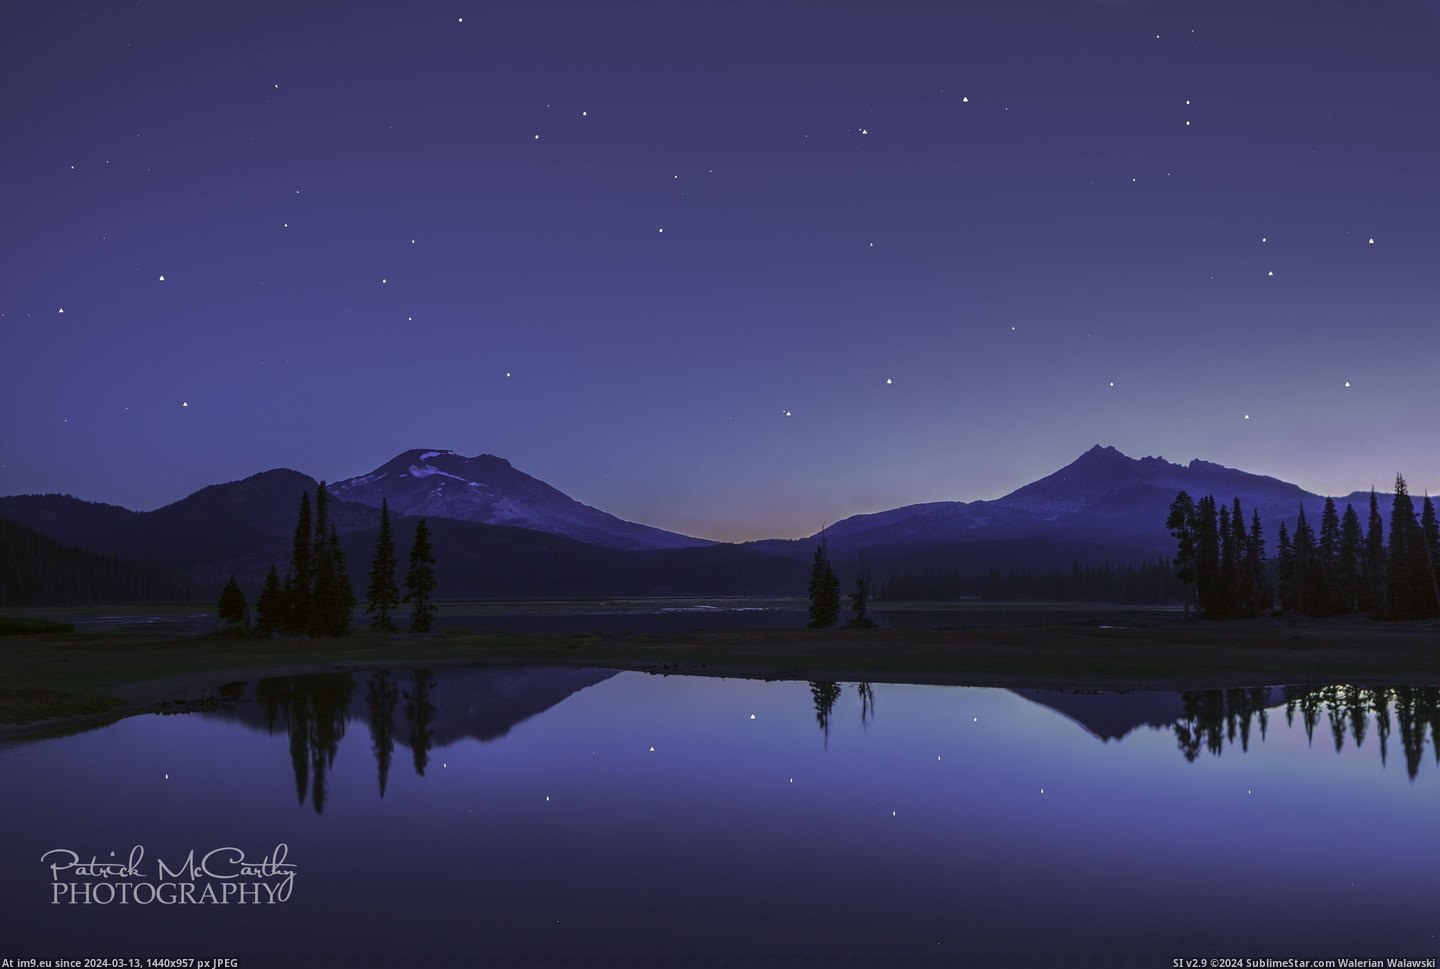 #Lake #5616x3744 #4am #Dad [Earthporn] My dad took this at Sparks Lake, OR at 4am. [5616x3744] Pic. (Изображение из альбом My r/EARTHPORN favs))